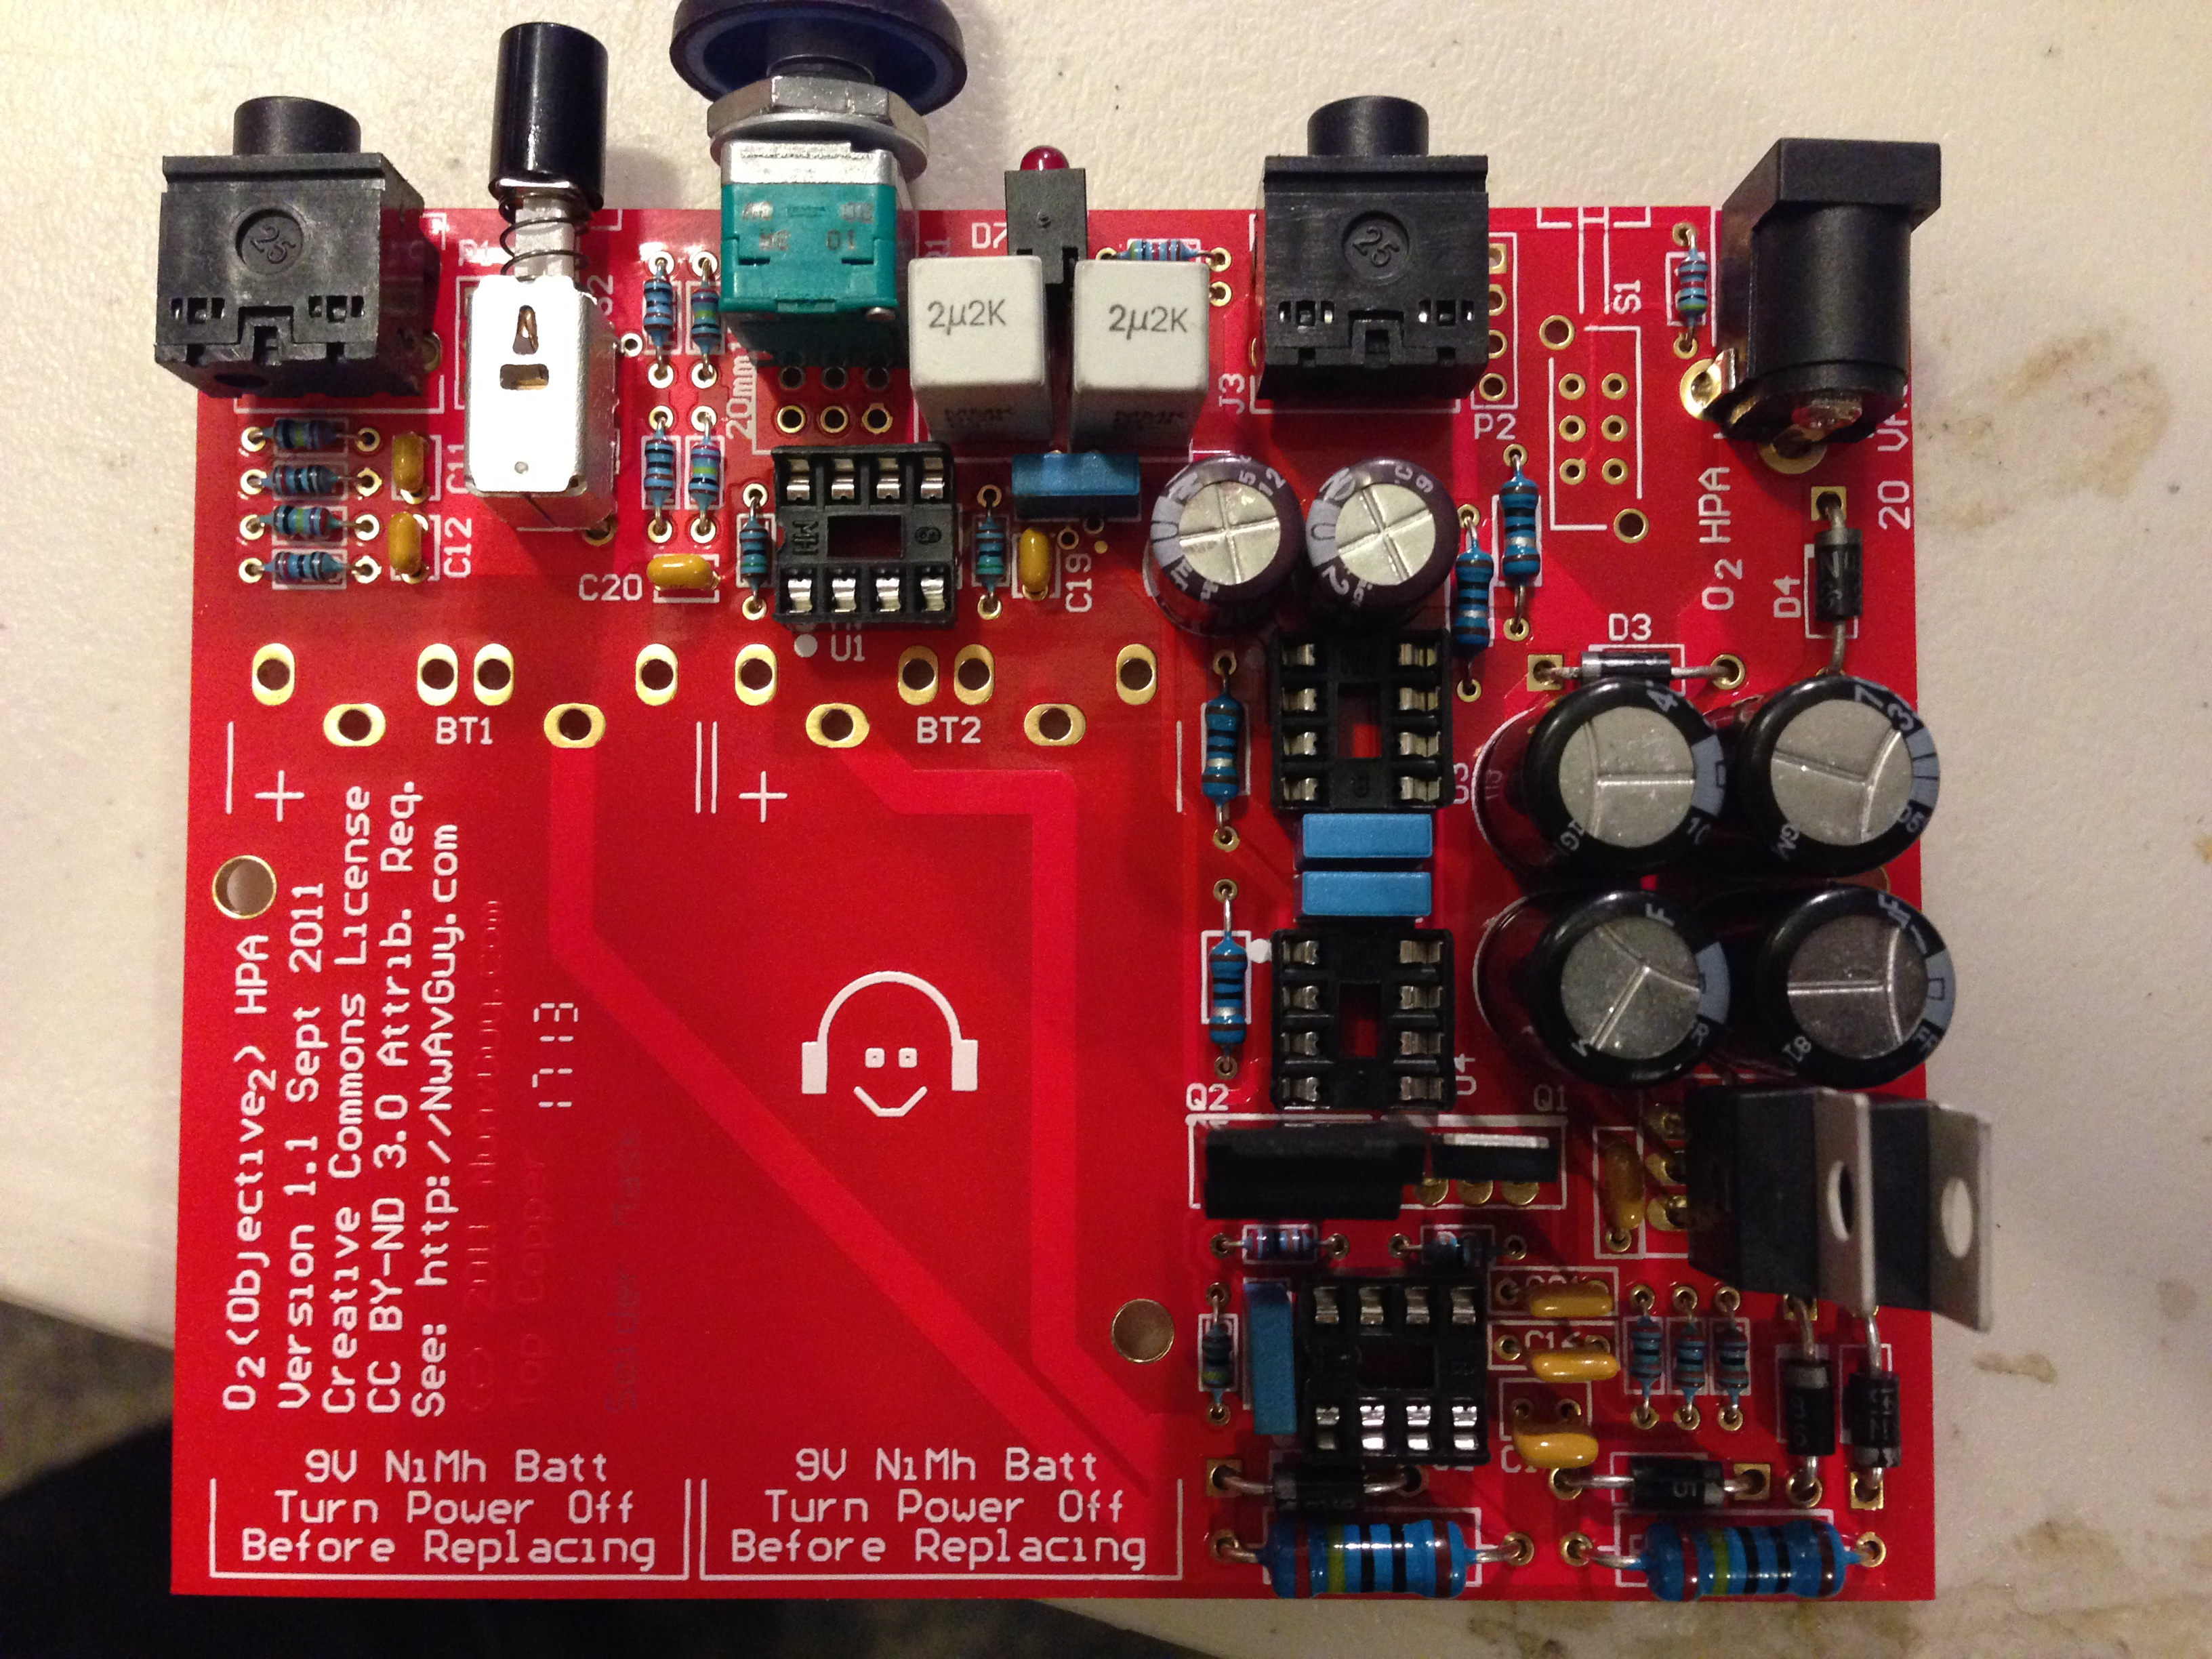 O2 Headphone Amplifier - Mostly Complete